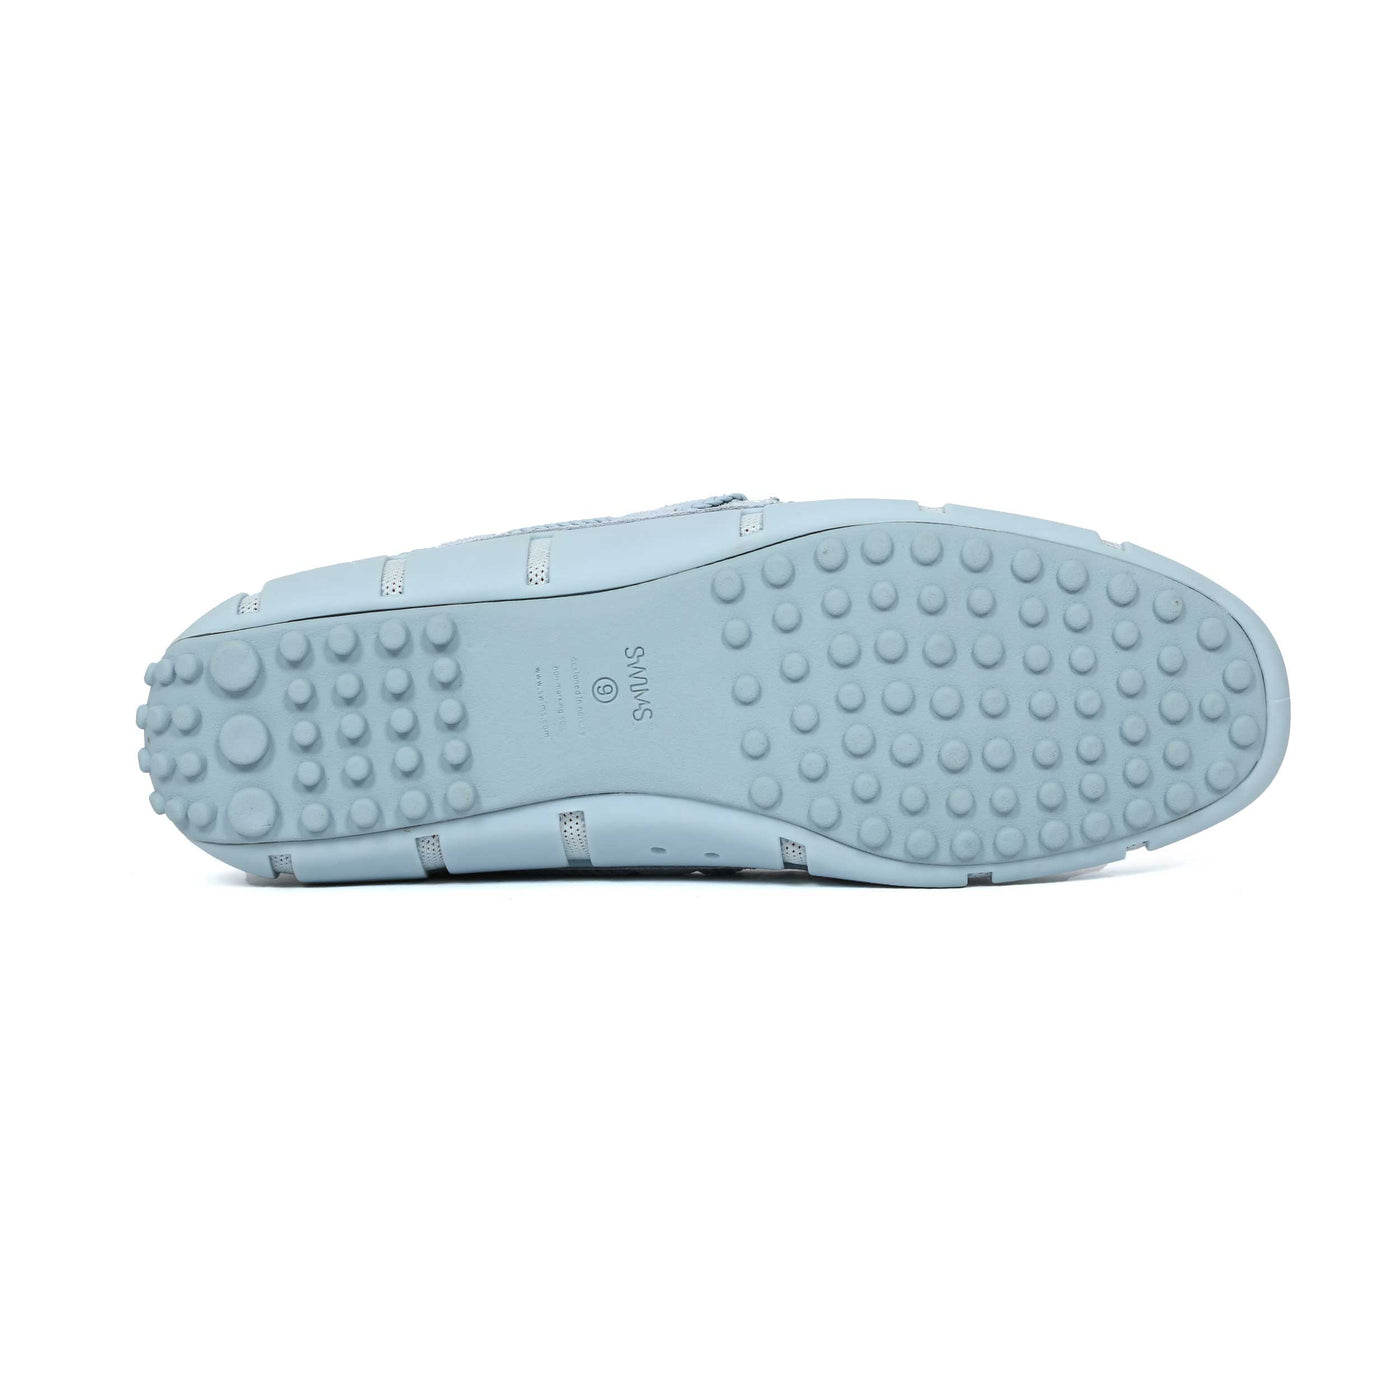 Swims Woven Driver Shoe in Ice Blue Sole